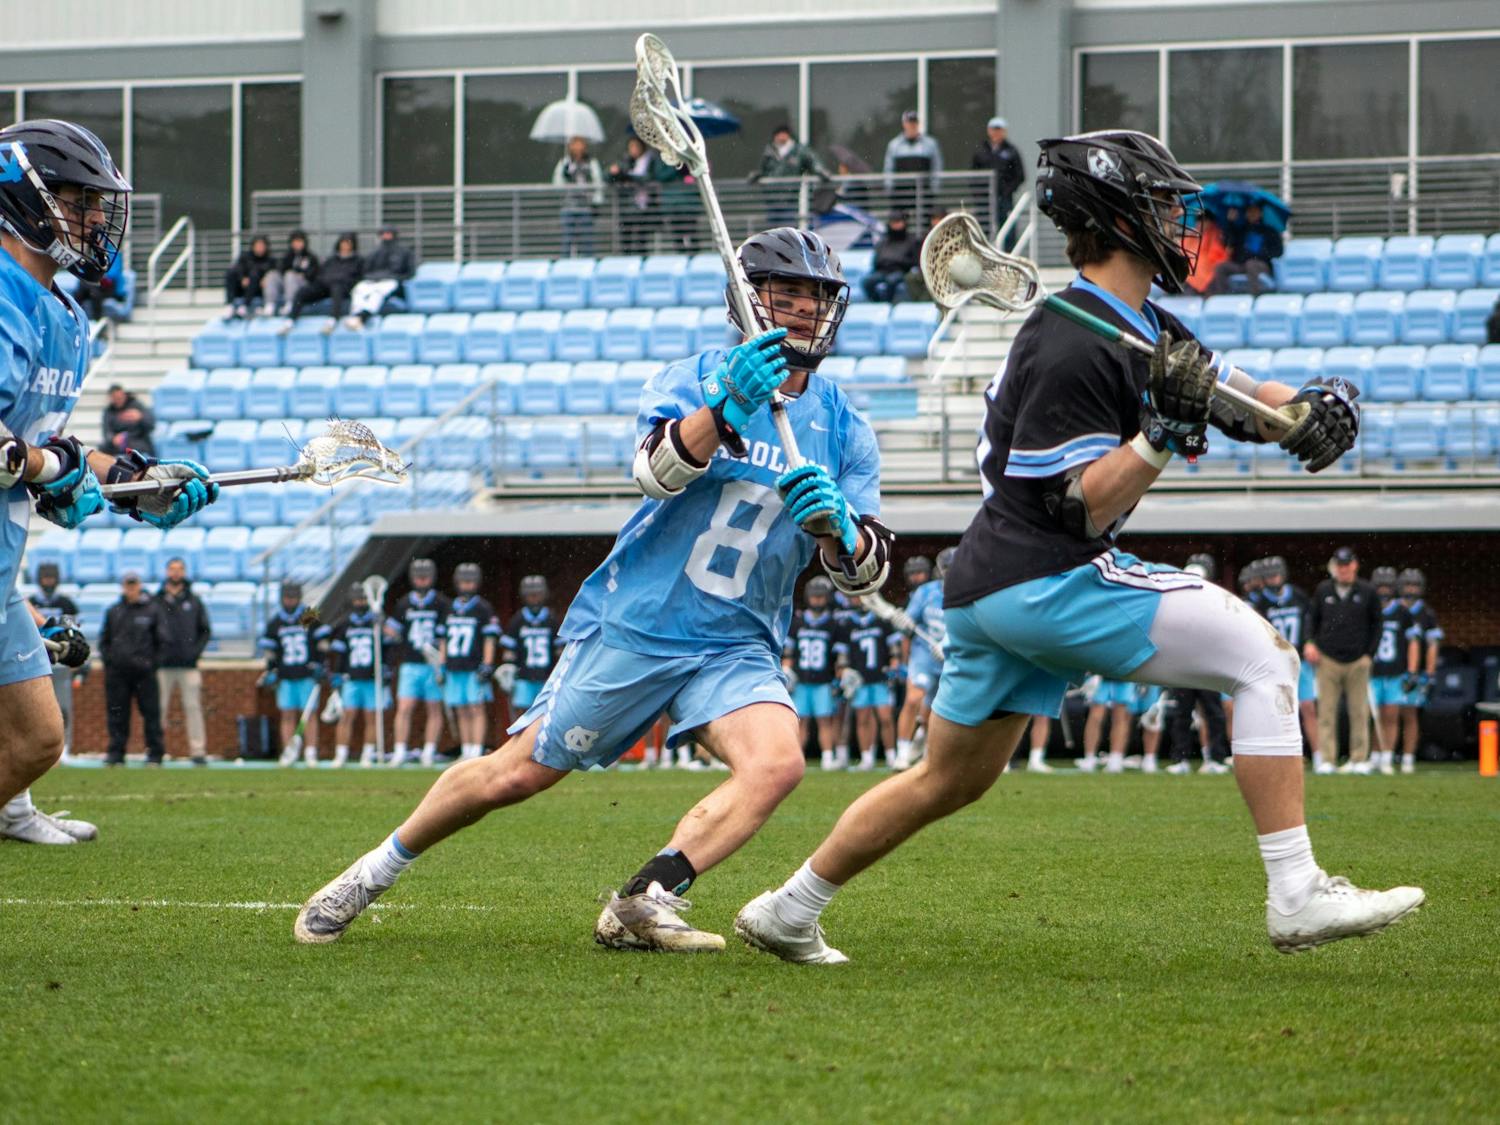 Senior attackman Nicky Soloman (8) attacks from behind in the Feb. 27 men's lacrosse game against Johns Hopkins University. UNC won 15-9.